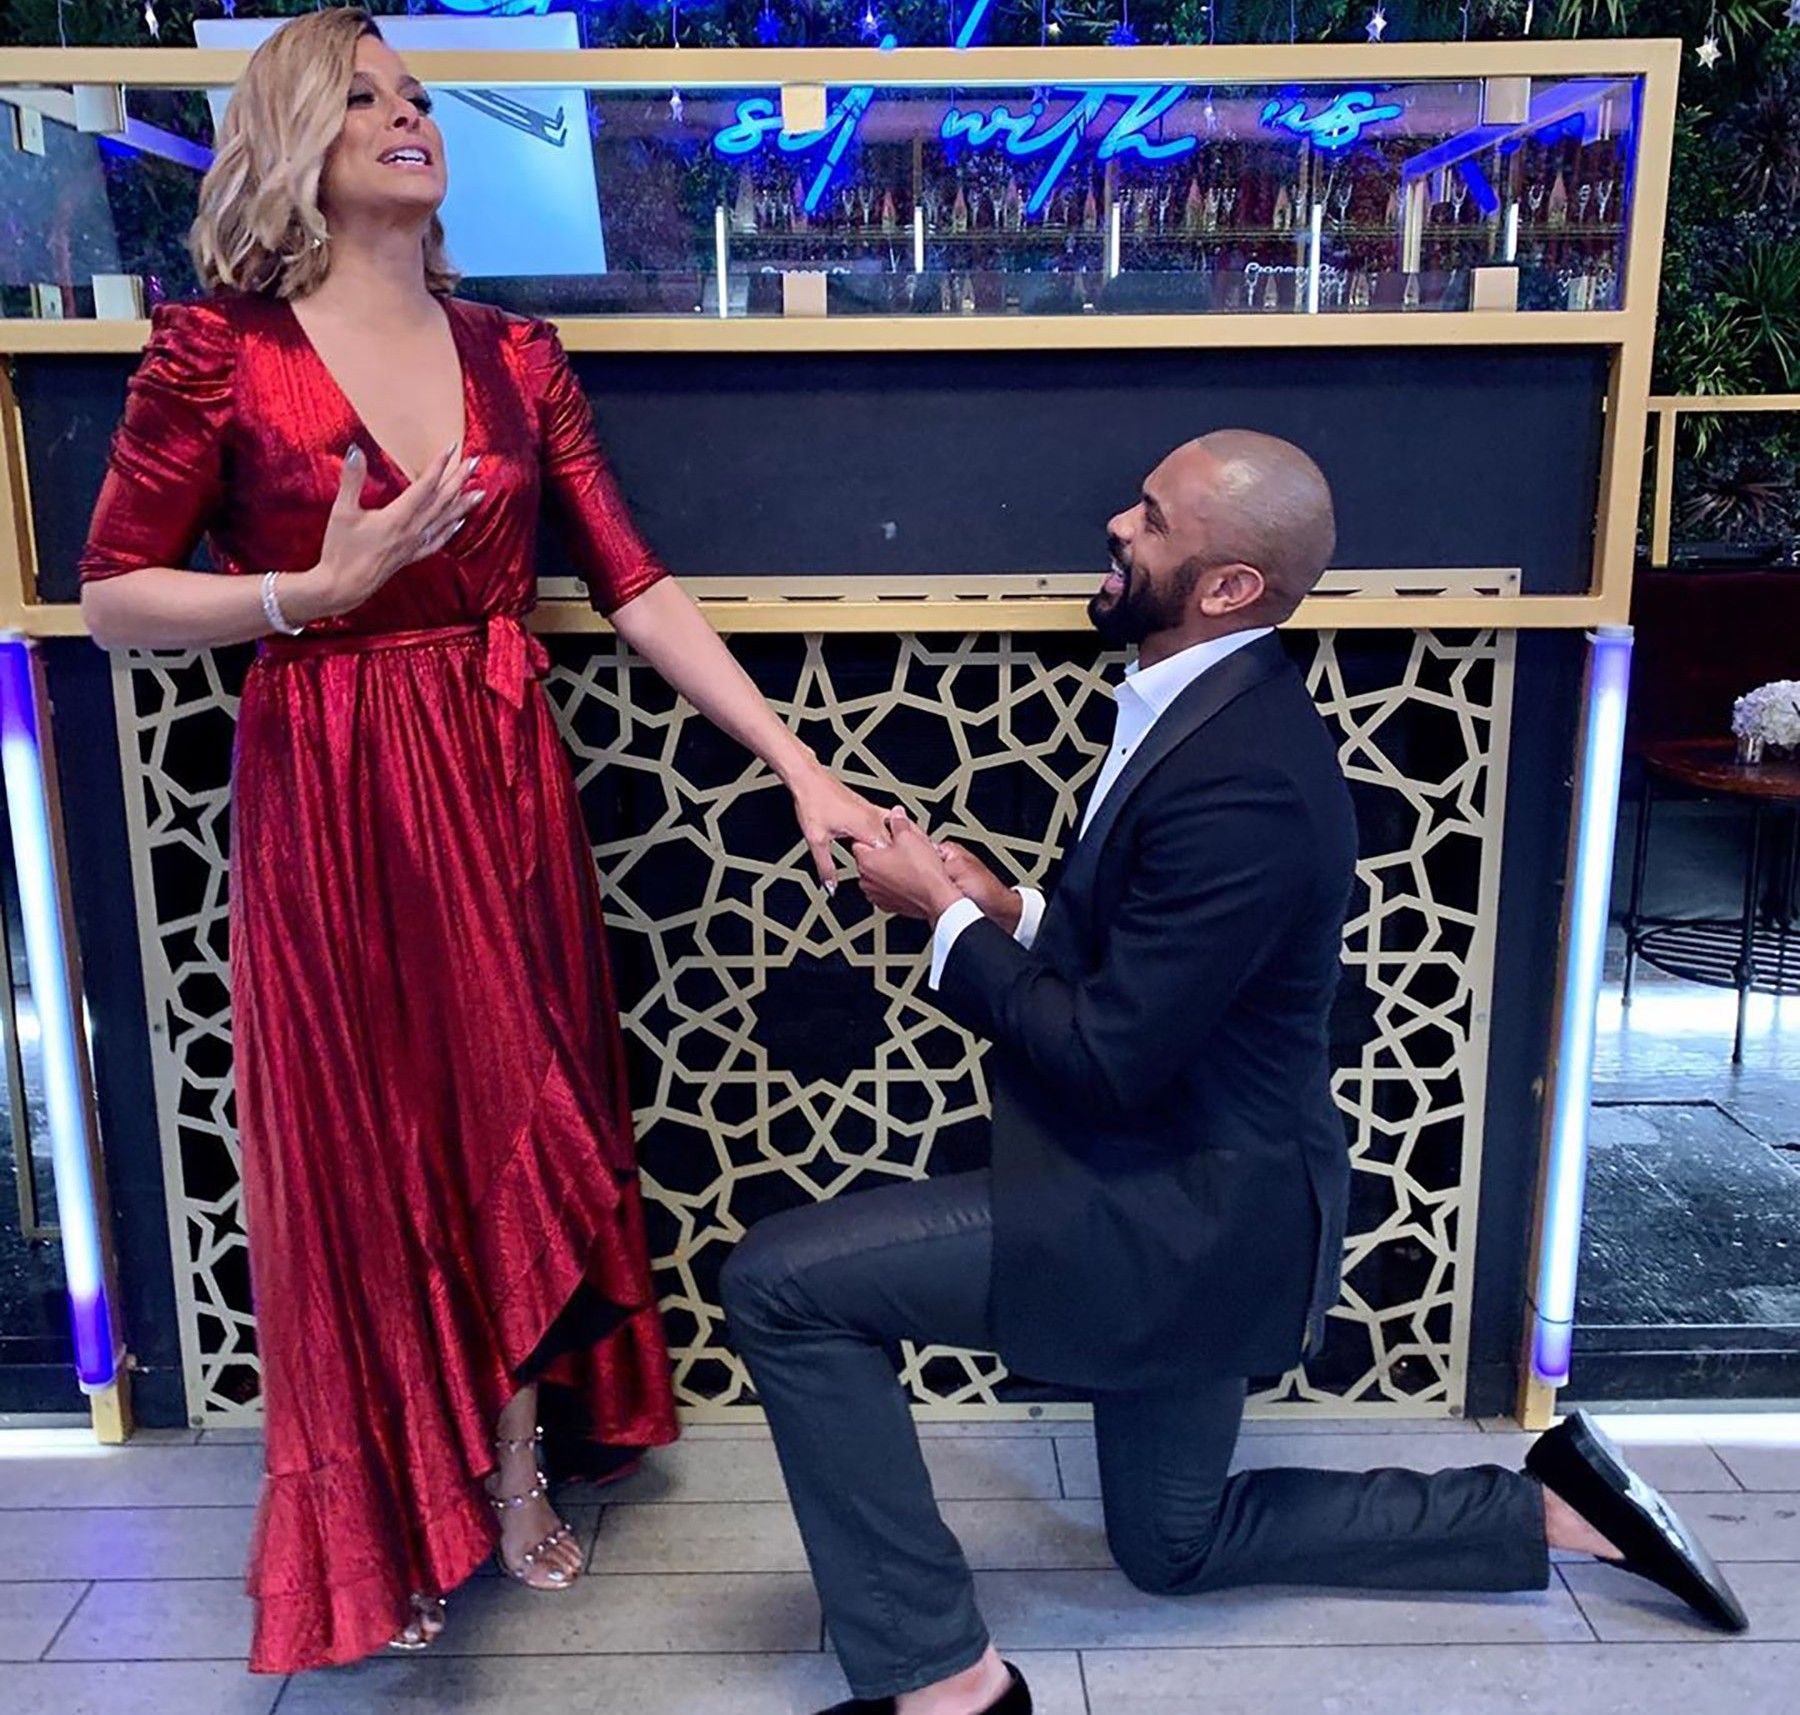 Robyn and Juan Dixon engagement